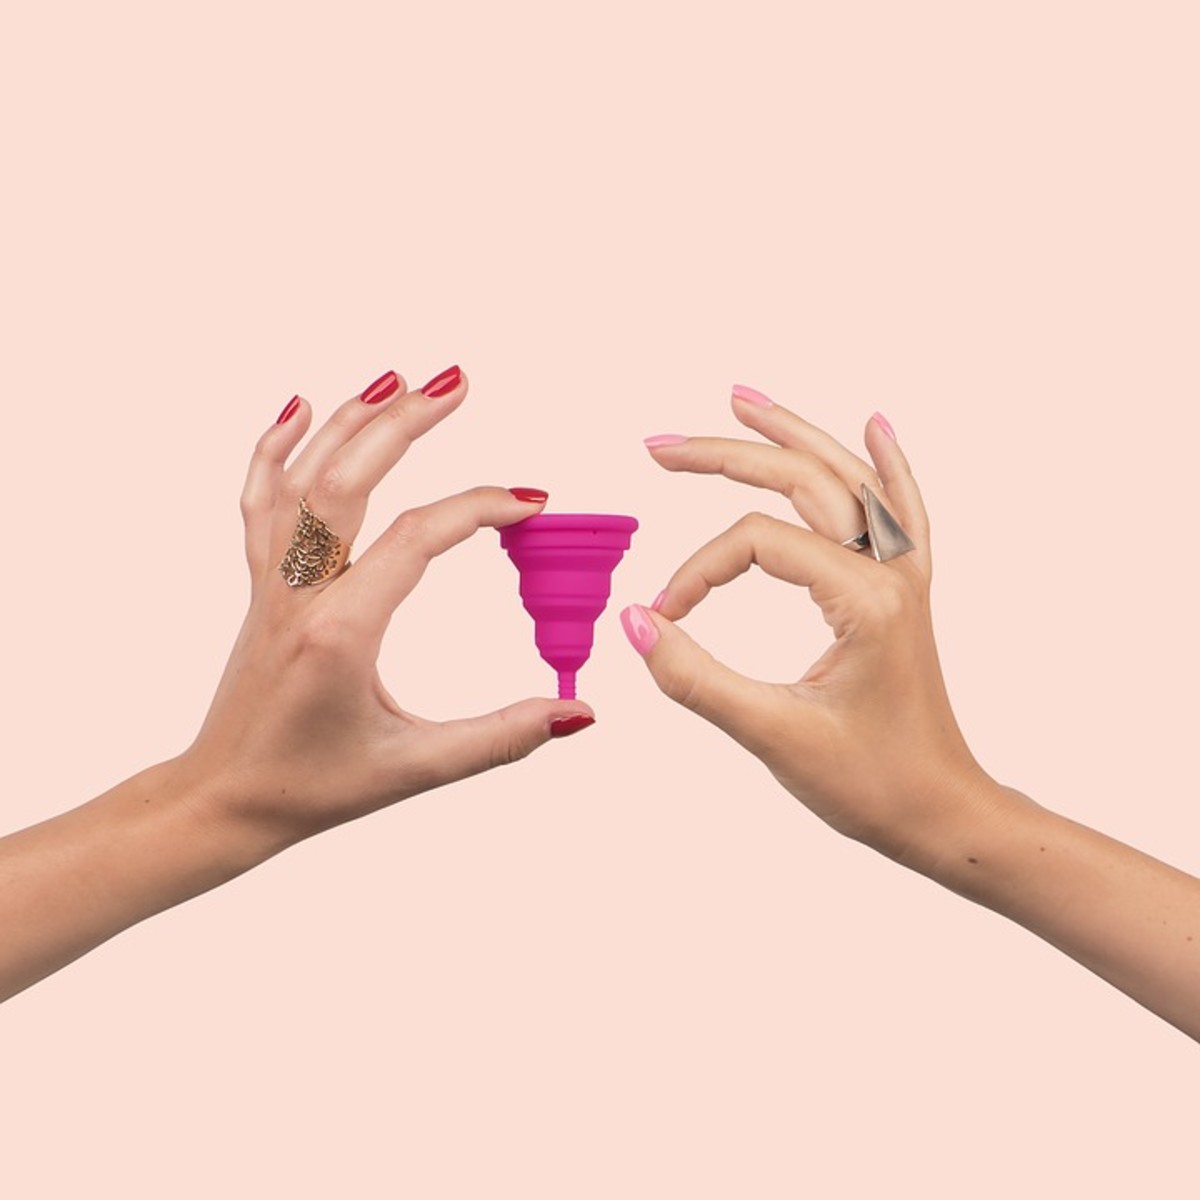 10 Things You Should Know About Menstrual Cups